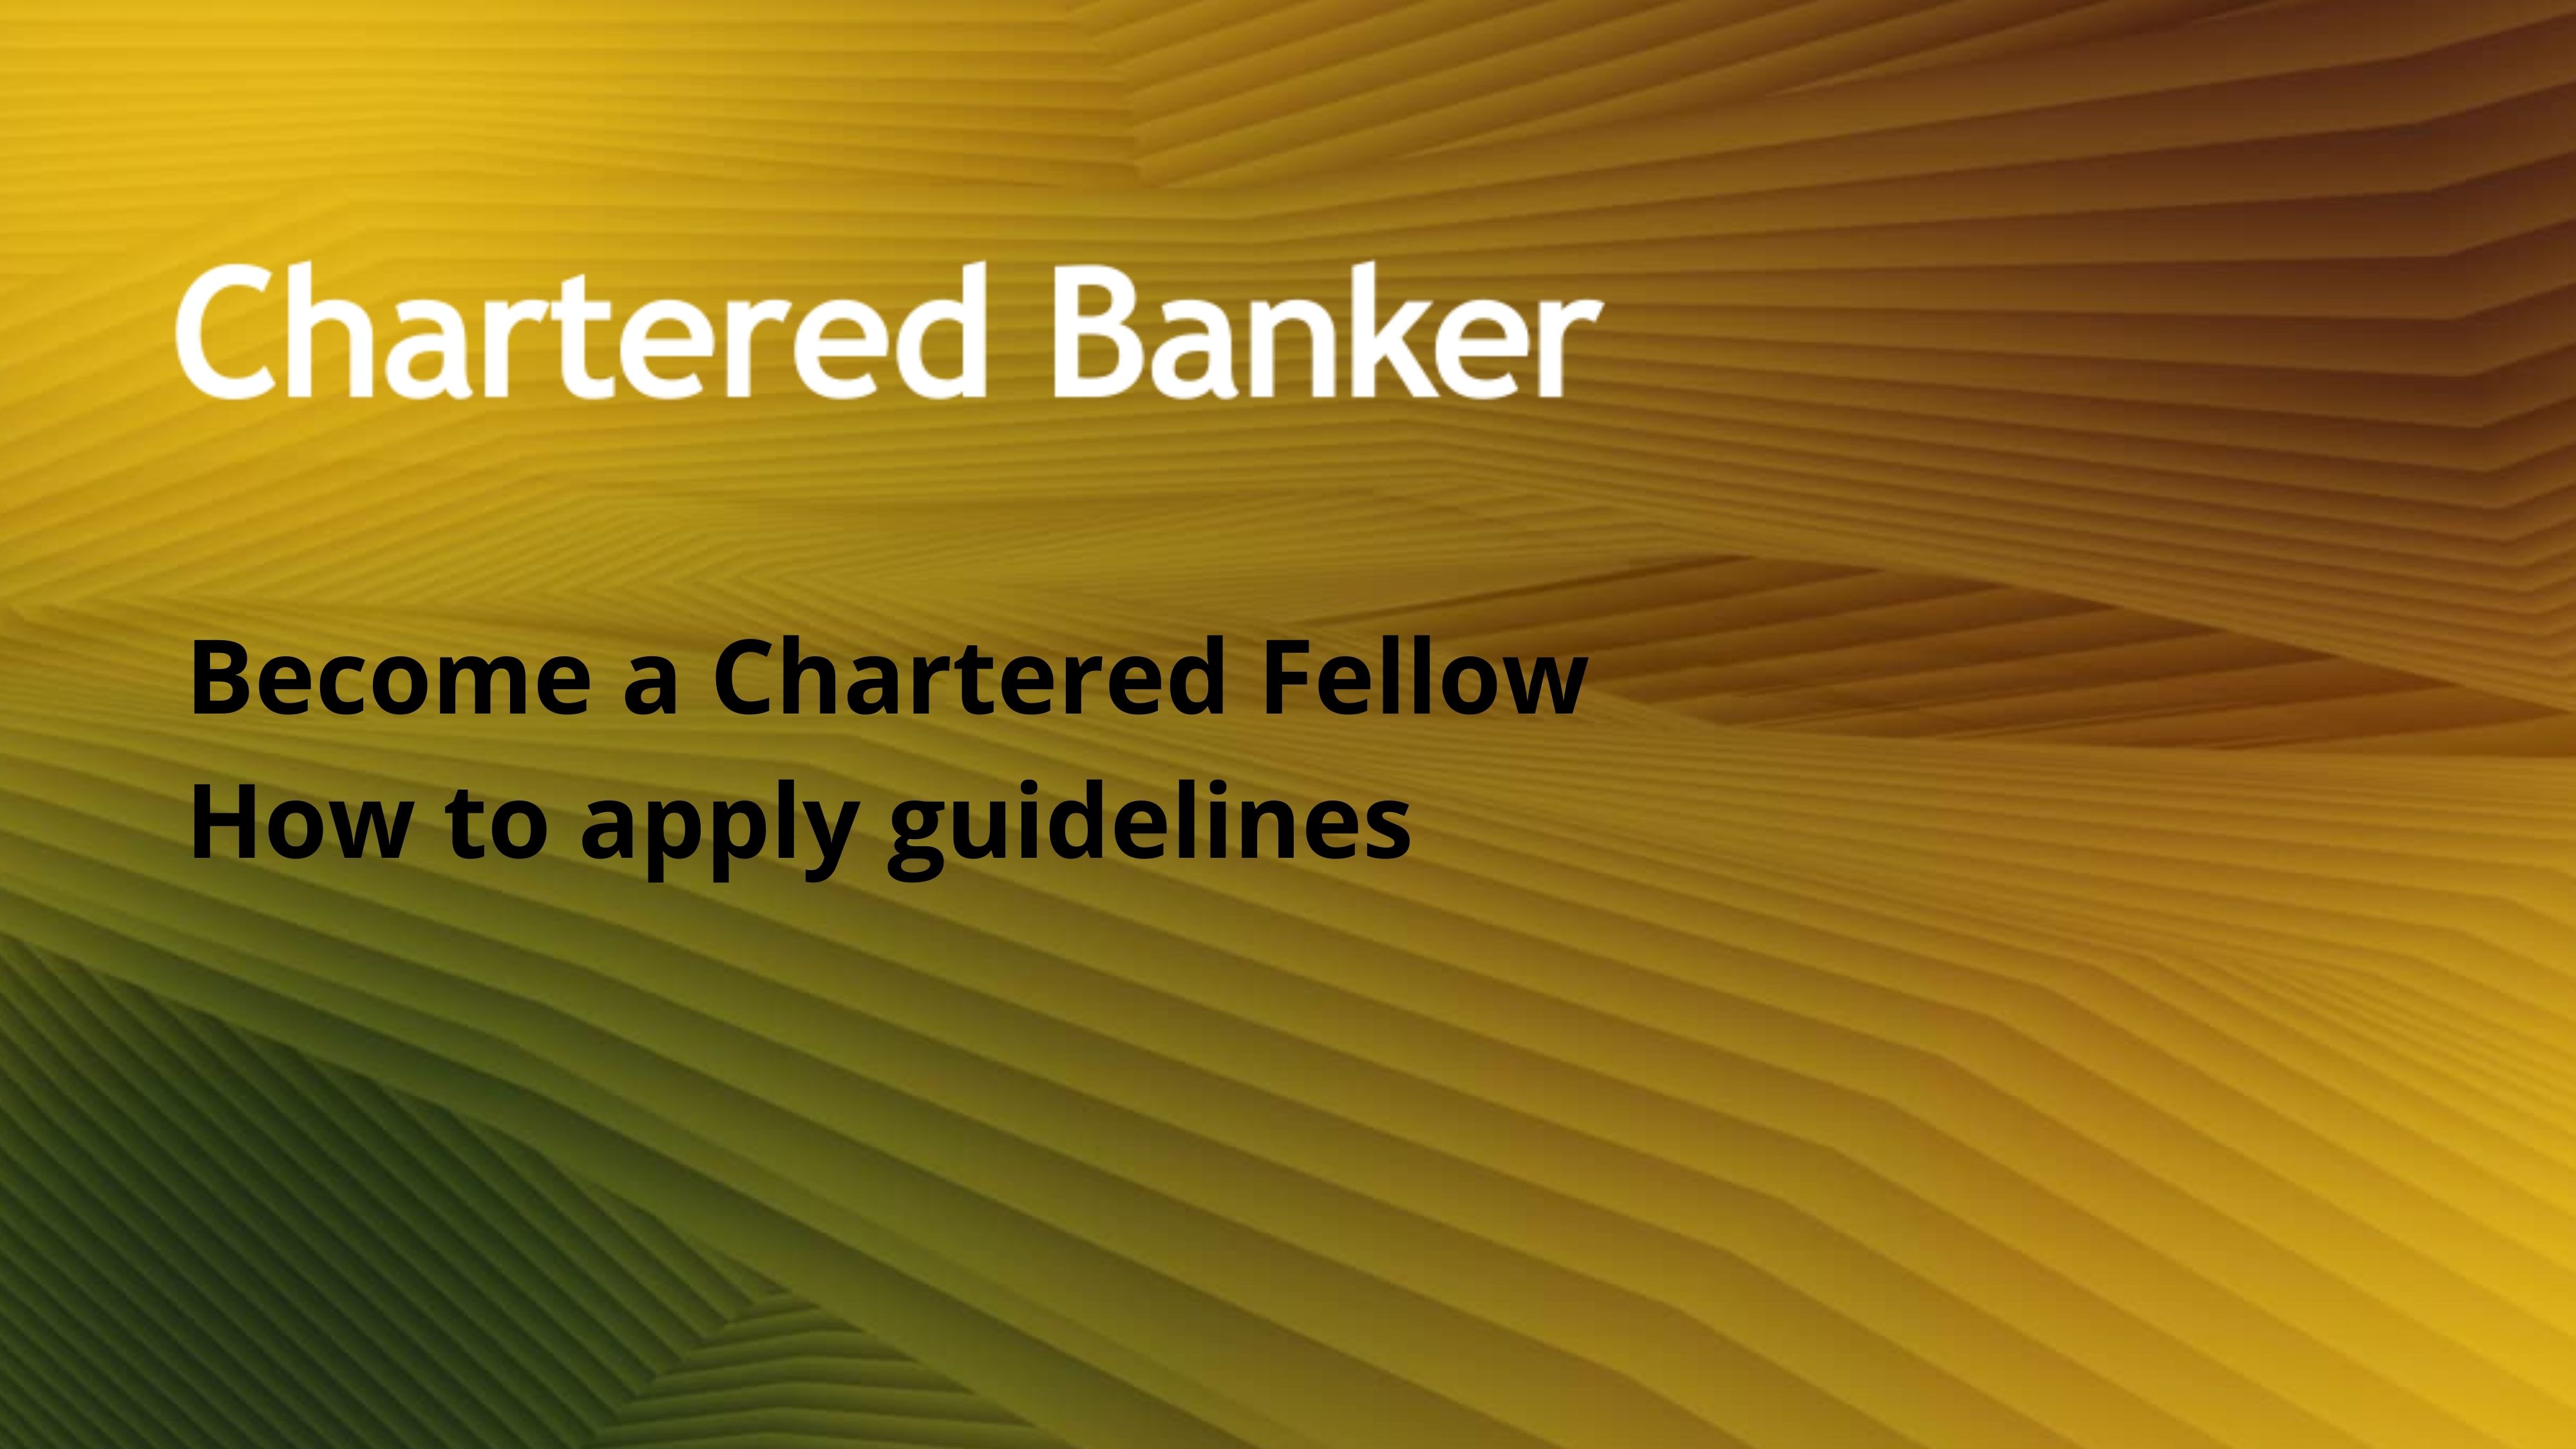 Chartered Banker Institute Fellowship: How to apply